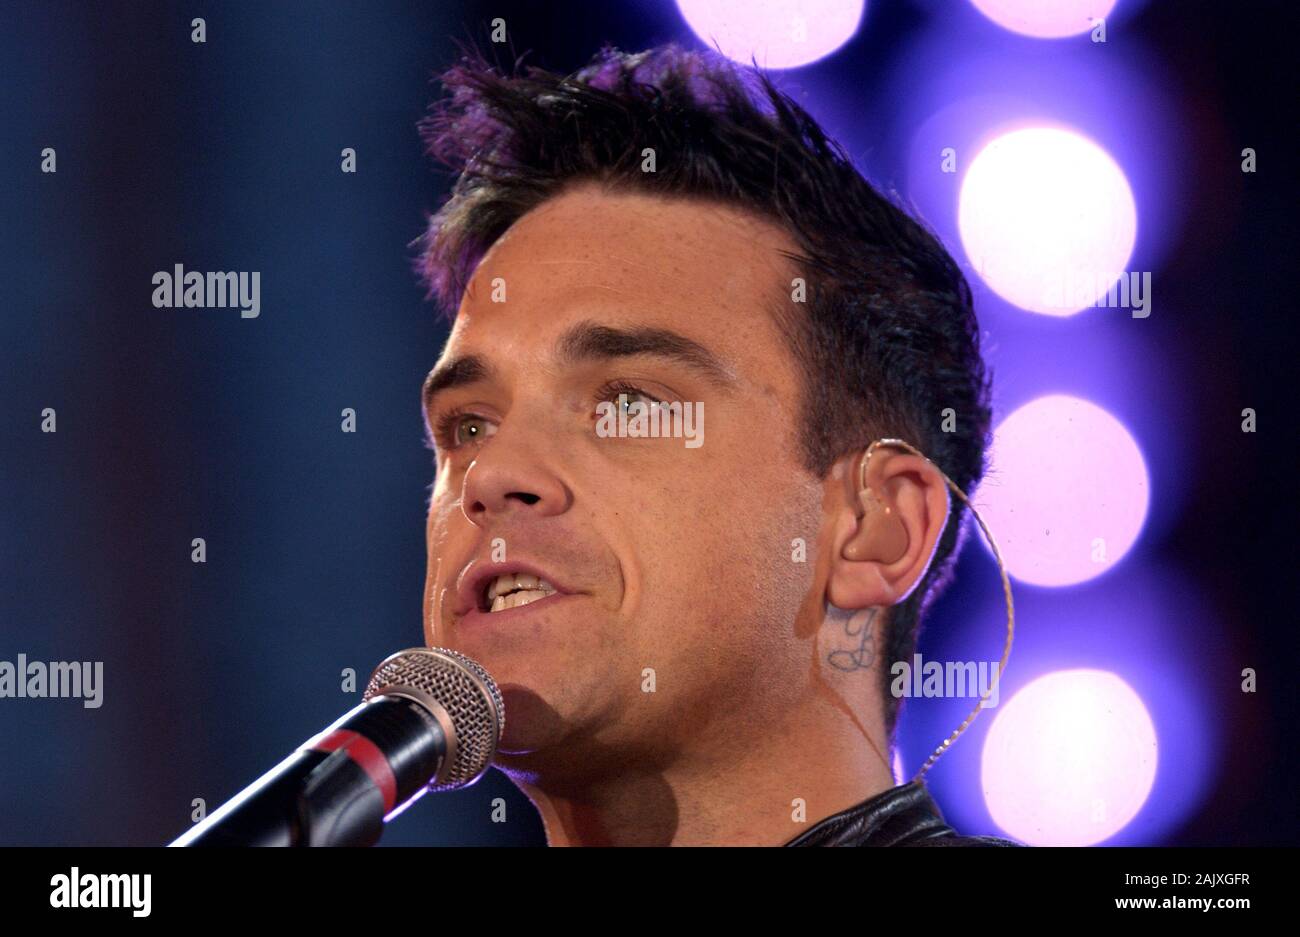 Milano Italy 05/31/2003, Civic Arena :  Robbie Williams in concert during the musical event "Festivalbar 2003". Stock Photo